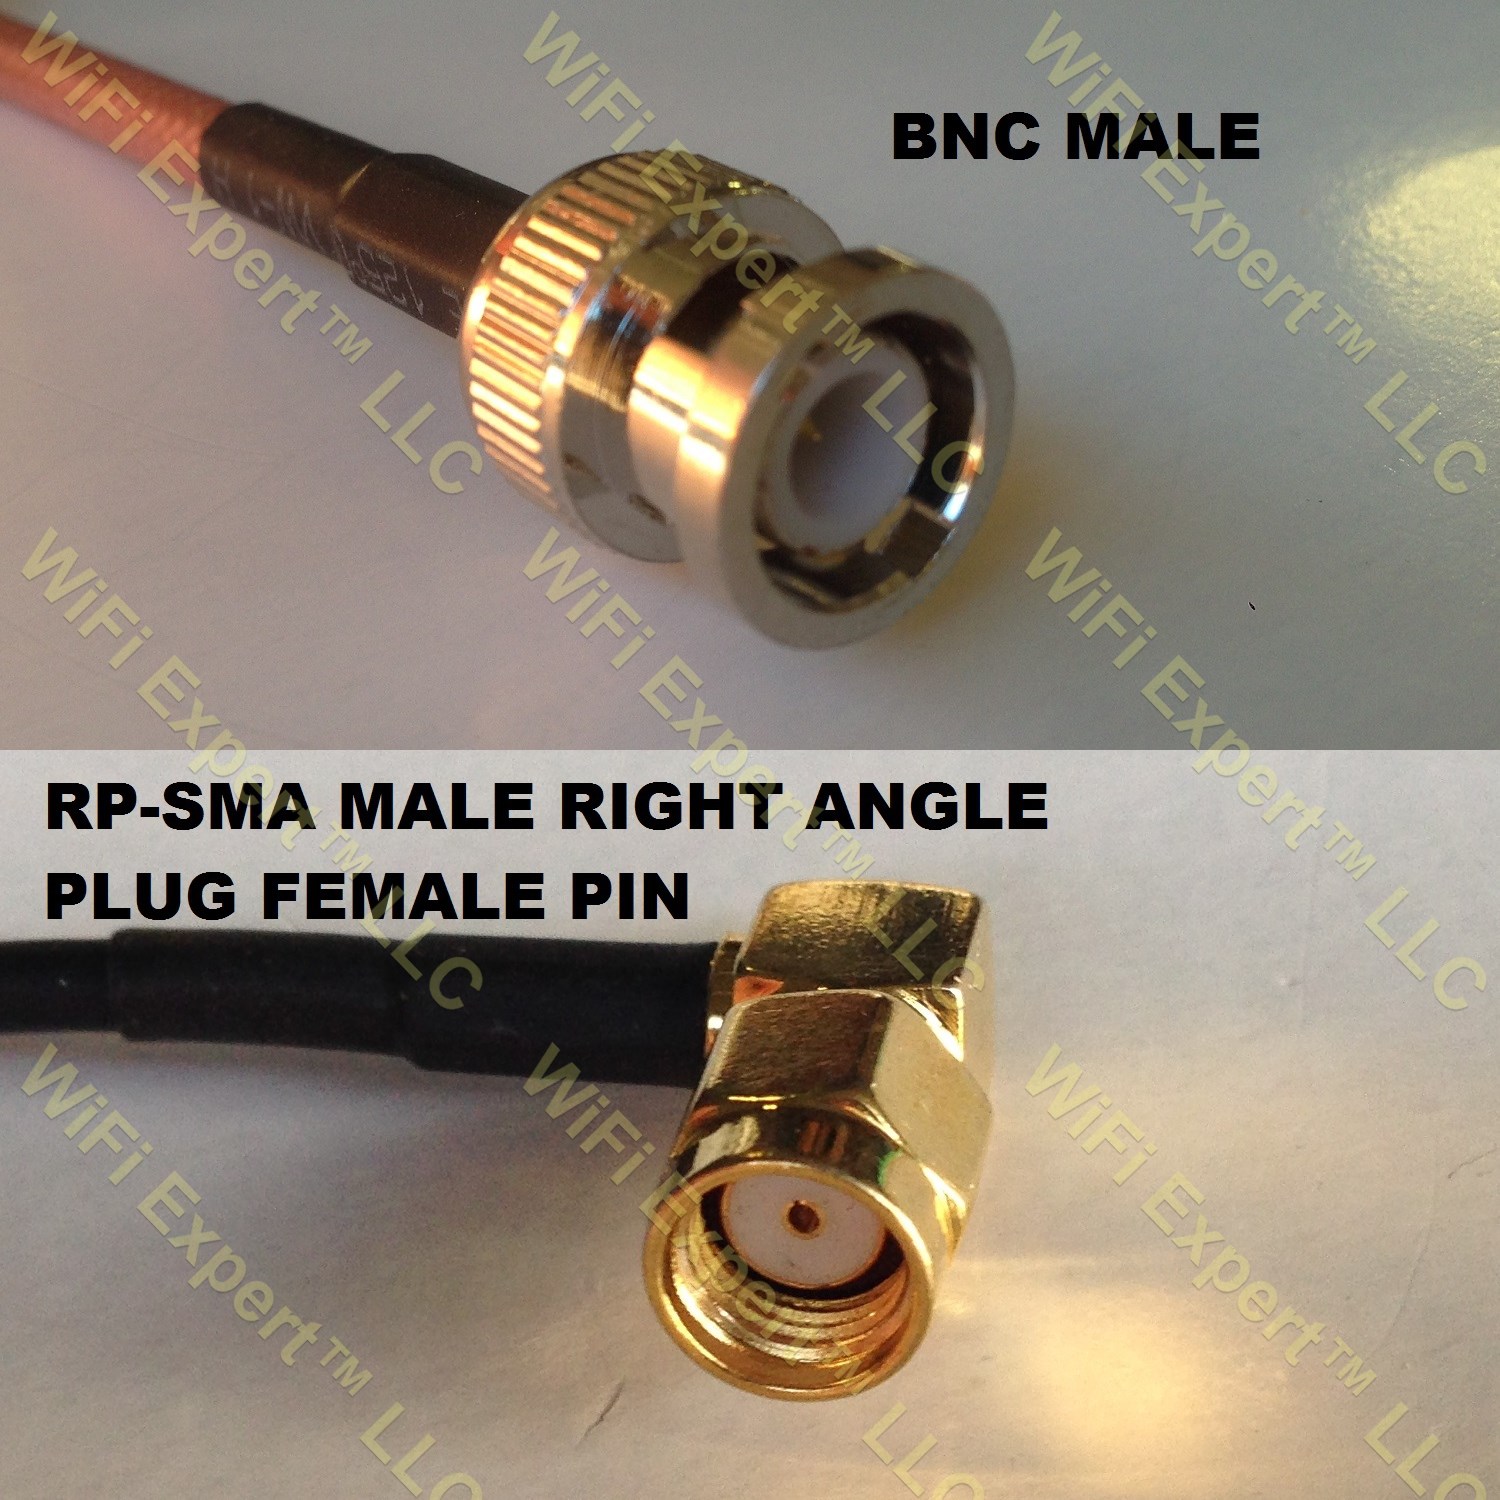 USA-CA LMR100 SMB FEMALE ANGLE to BNC MALE Coaxial RF Pigtail Cable 